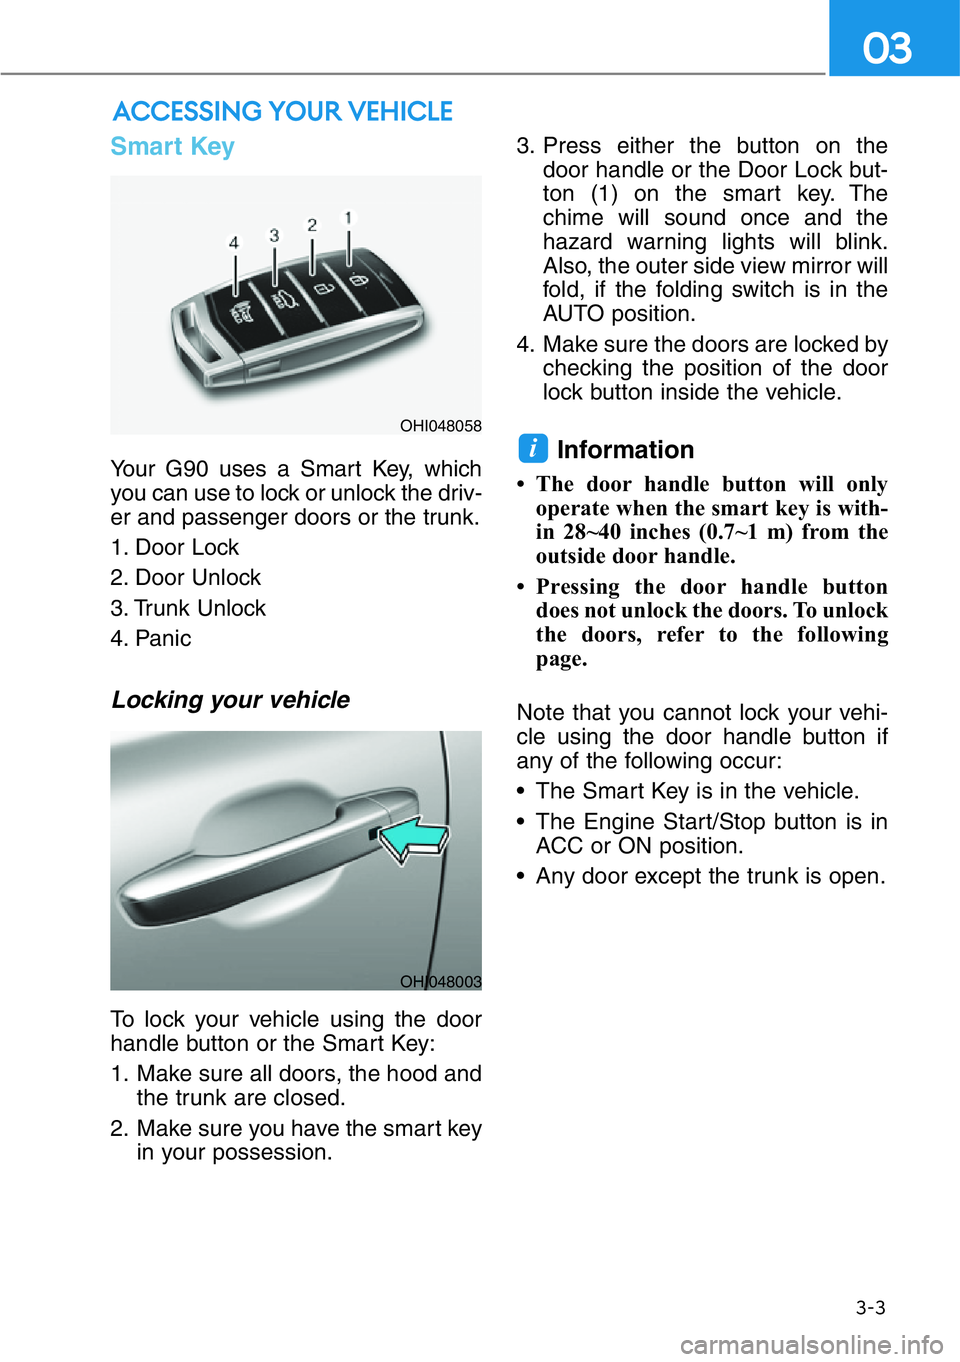 HYUNDAI GENESIS G90 2021  Owners Manual 3-3
03
Smart Key  
Your G90 uses a Smart Key, which
you can use to lock or unlock the driv-
er and passenger doors or the trunk.
1. Door Lock 
2. Door Unlock
3. Trunk Unlock
4. Panic 
Locking your veh